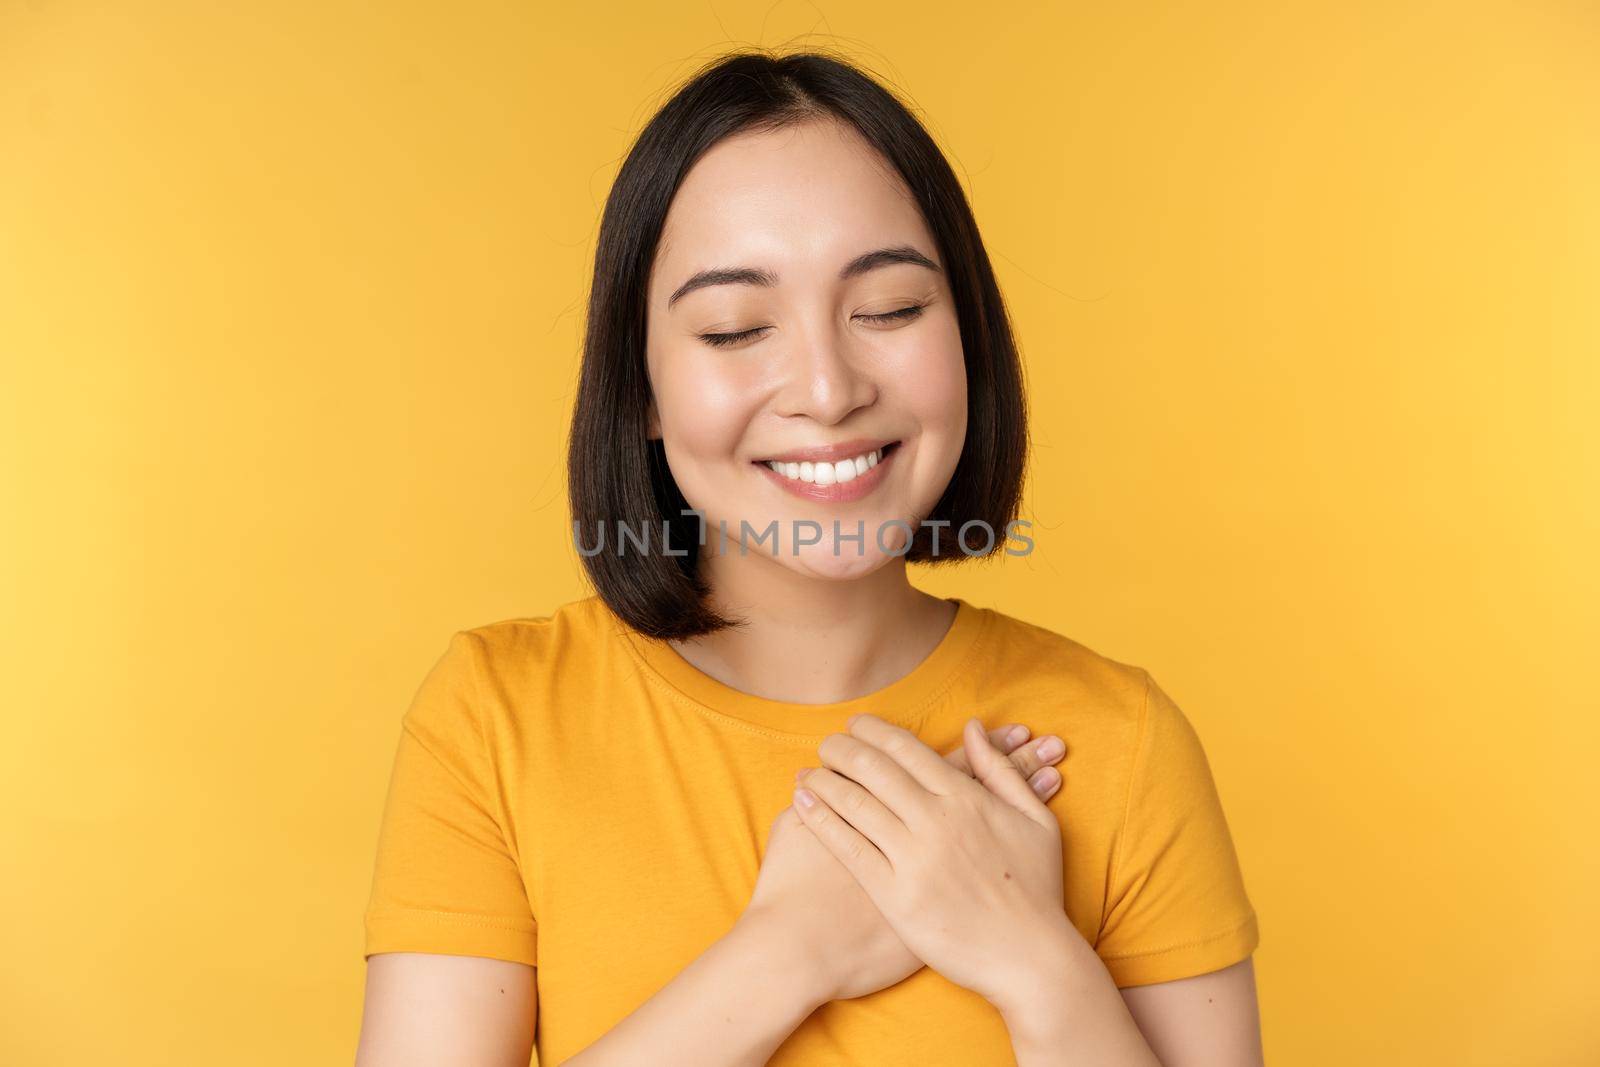 Beautiful asian woman, smiling with tenderness and care, holding hands on heart, standing in tshirt over yellow background.